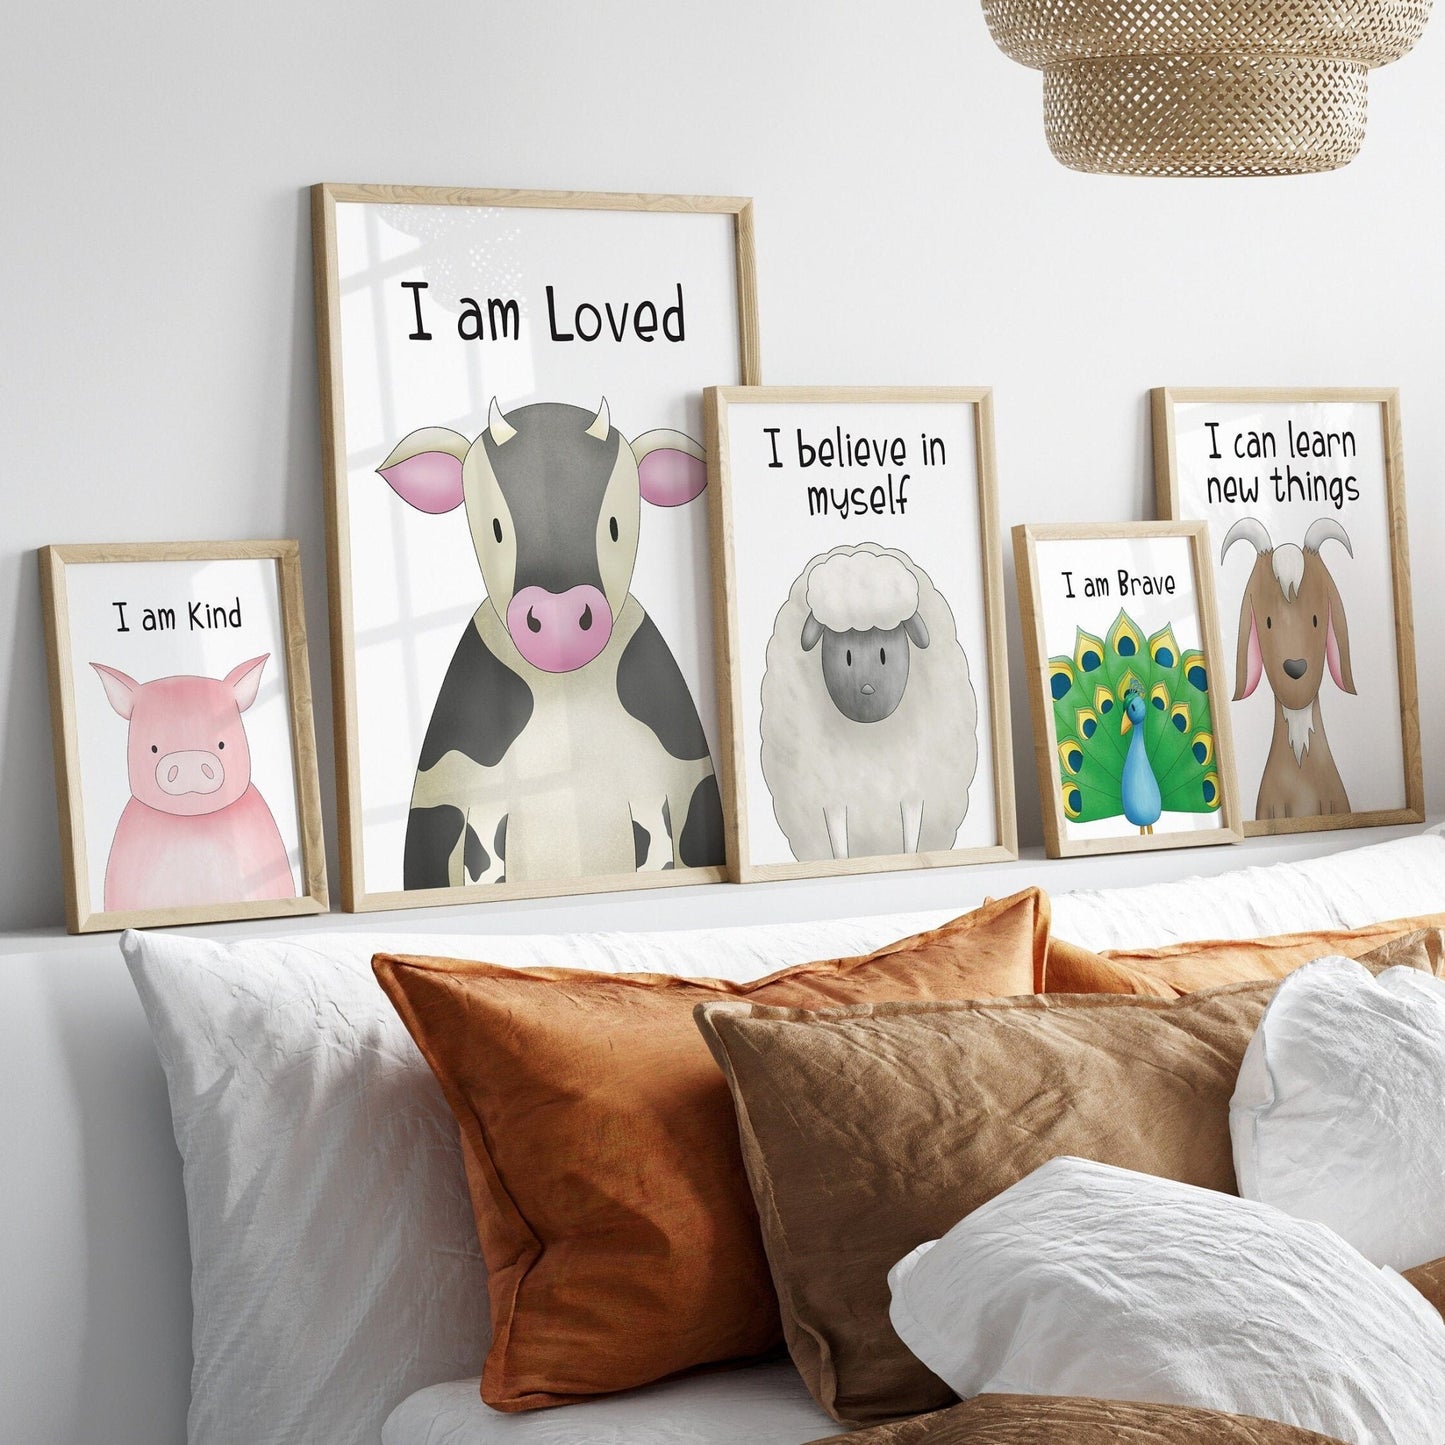 Full set of 9 Farm animal nursery prints - Dolly and Fred Designs